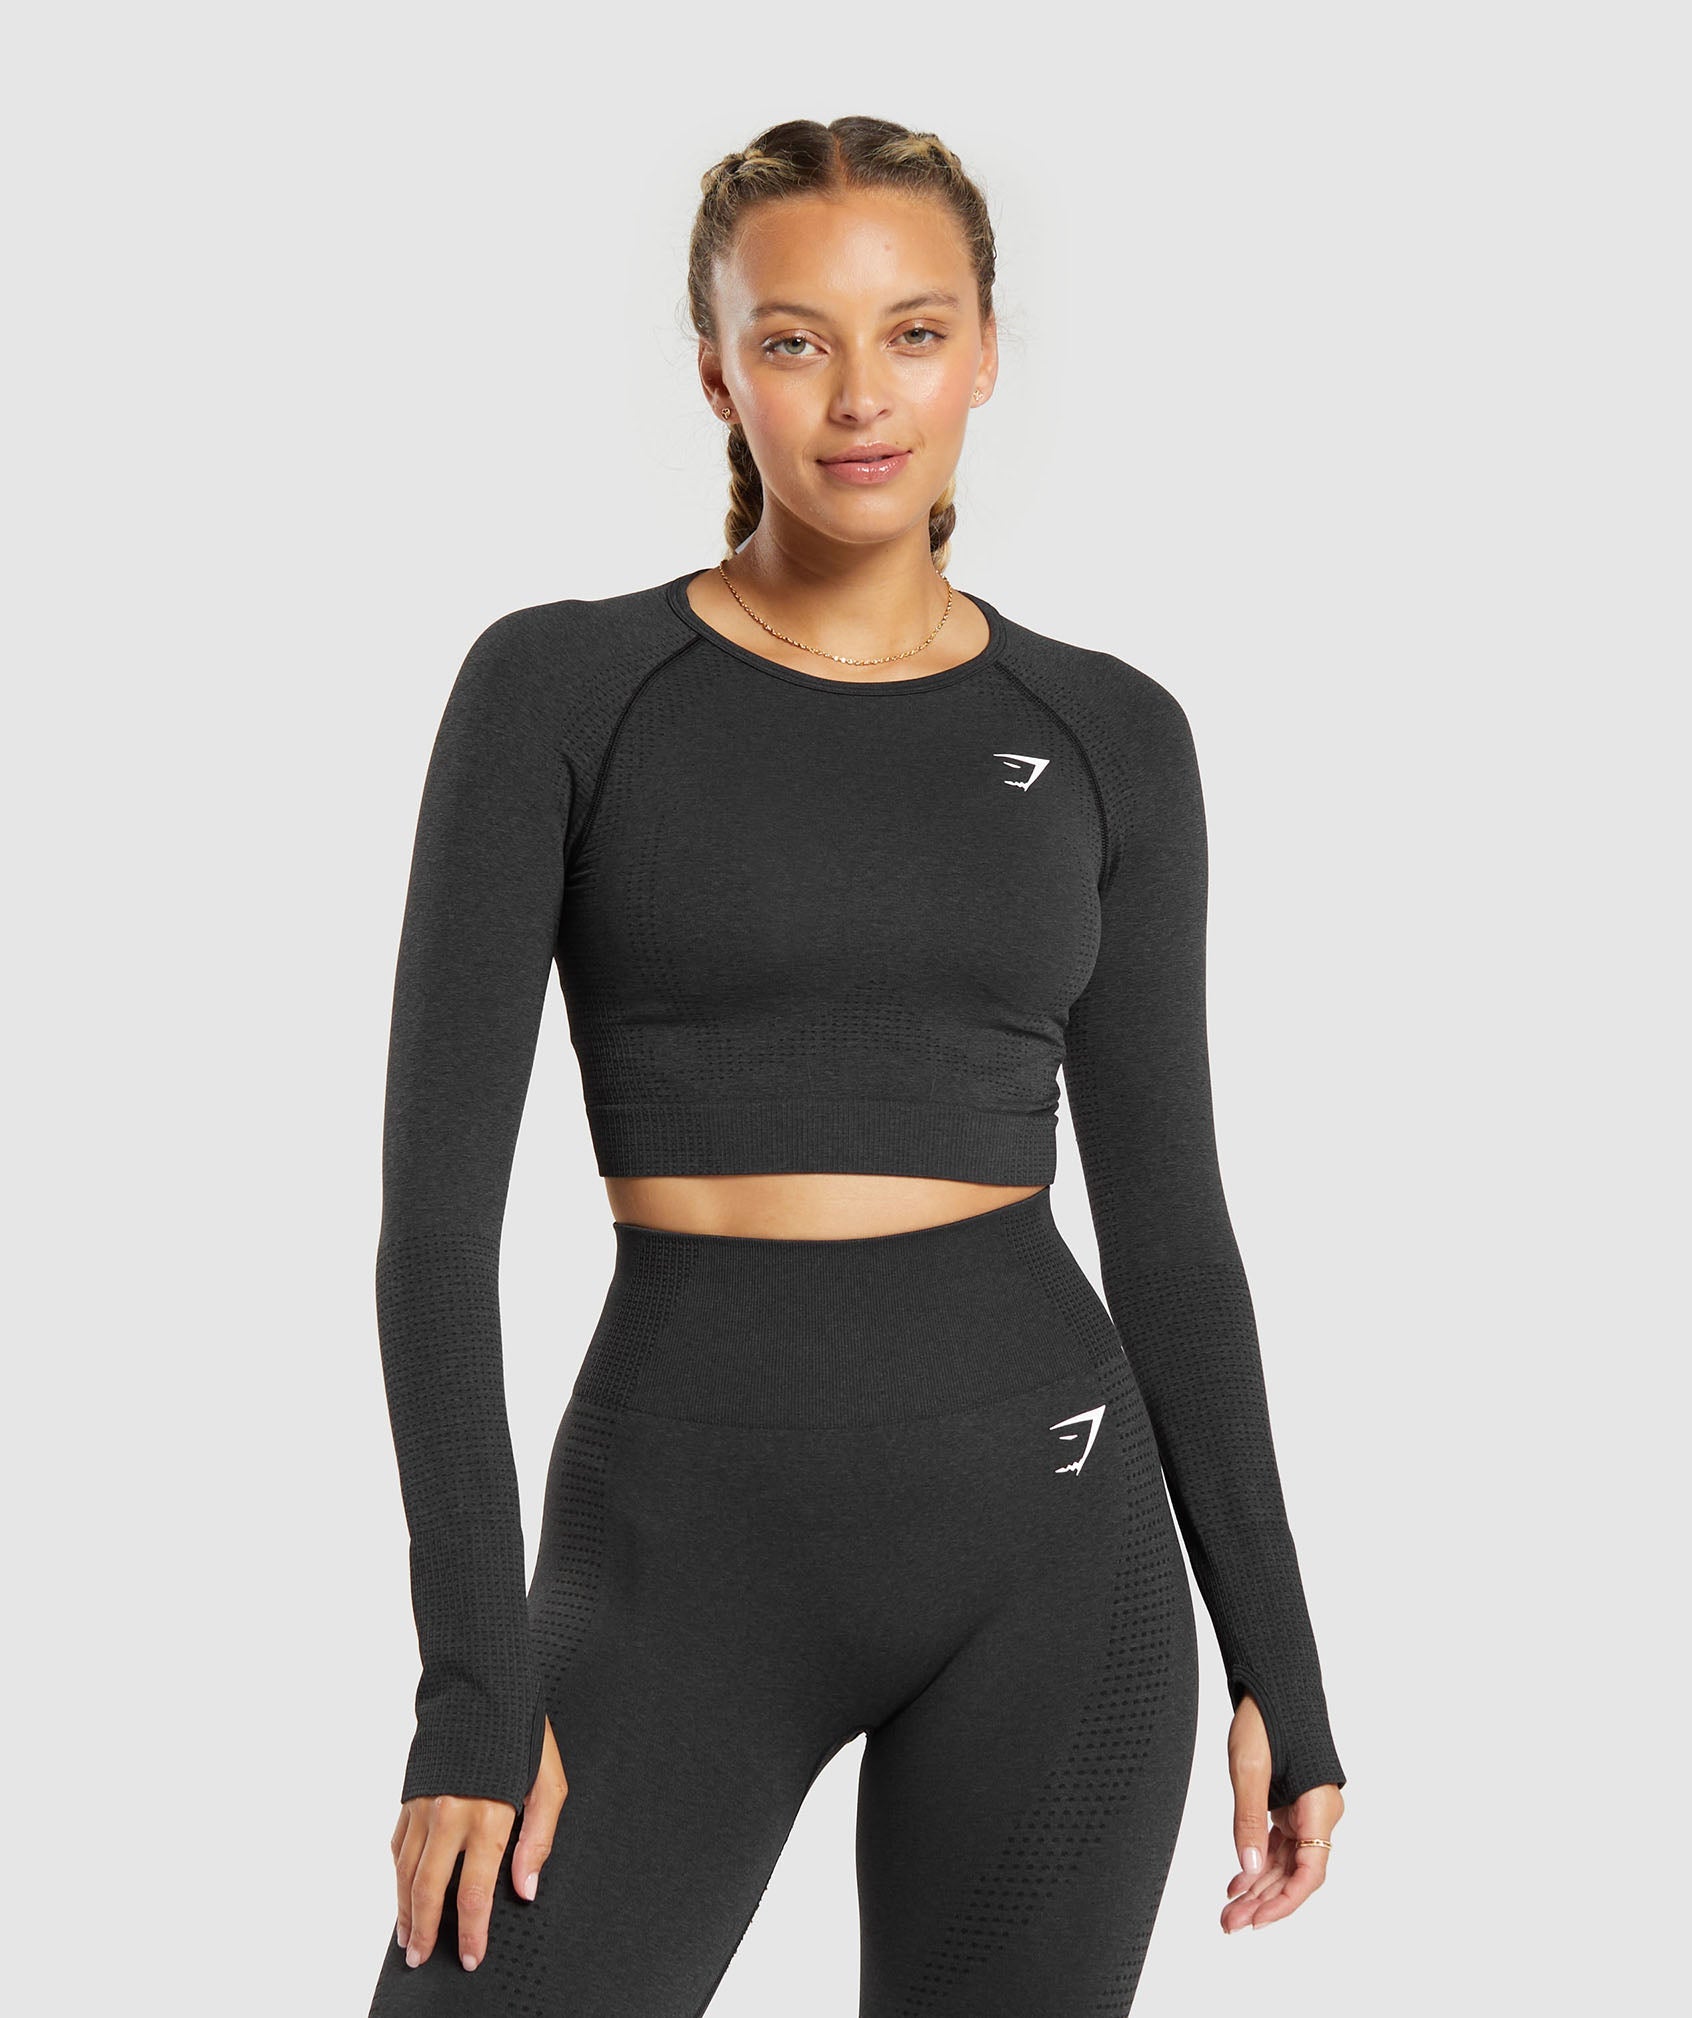 Nike pro graphic leggings and crop top 2 piece set Small Women's